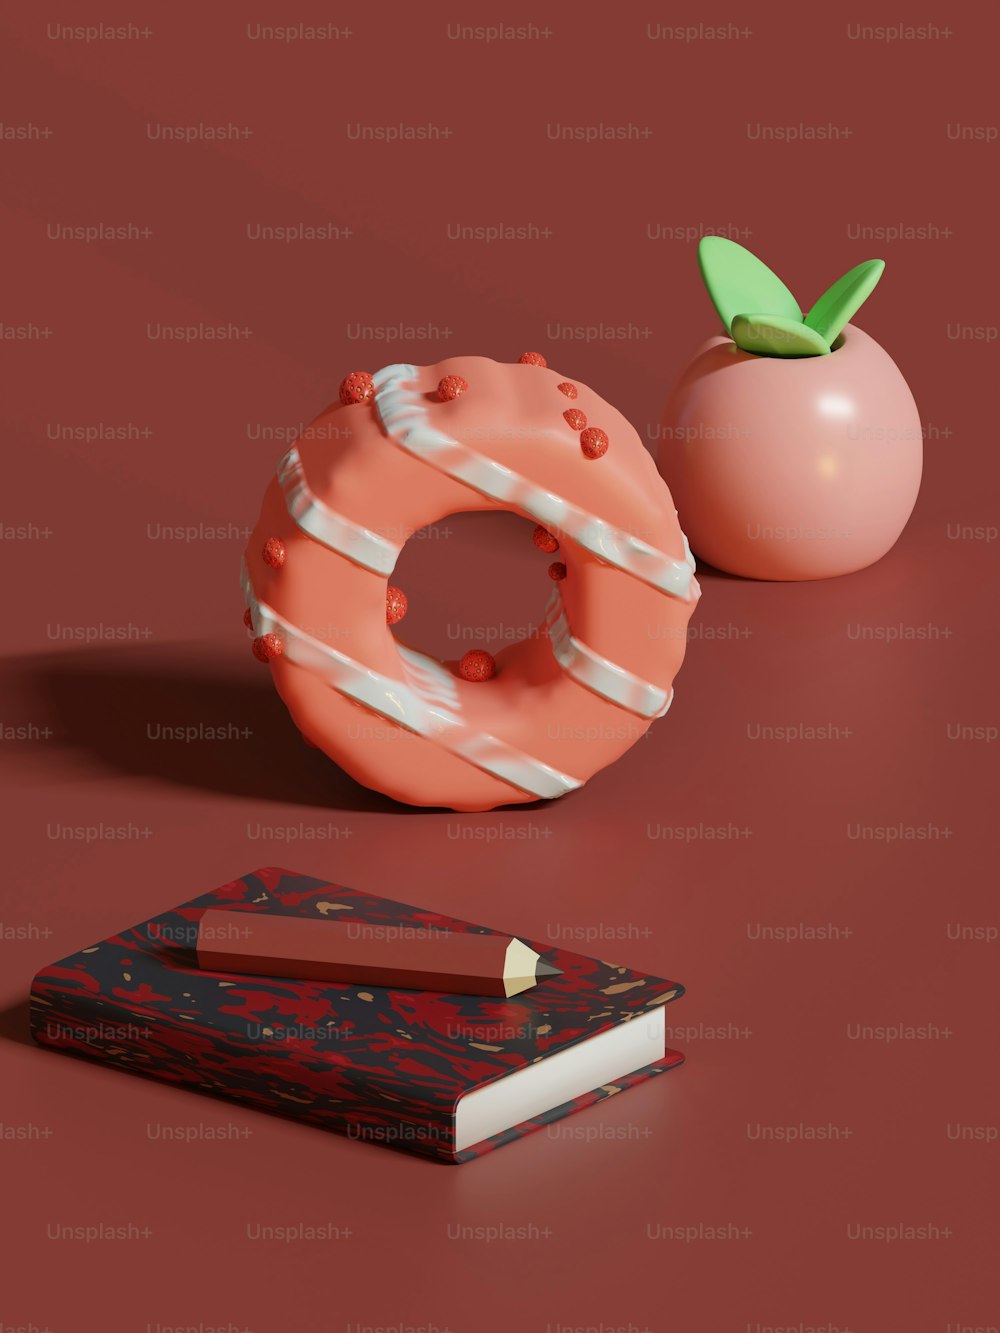 a donut and a book on a red surface